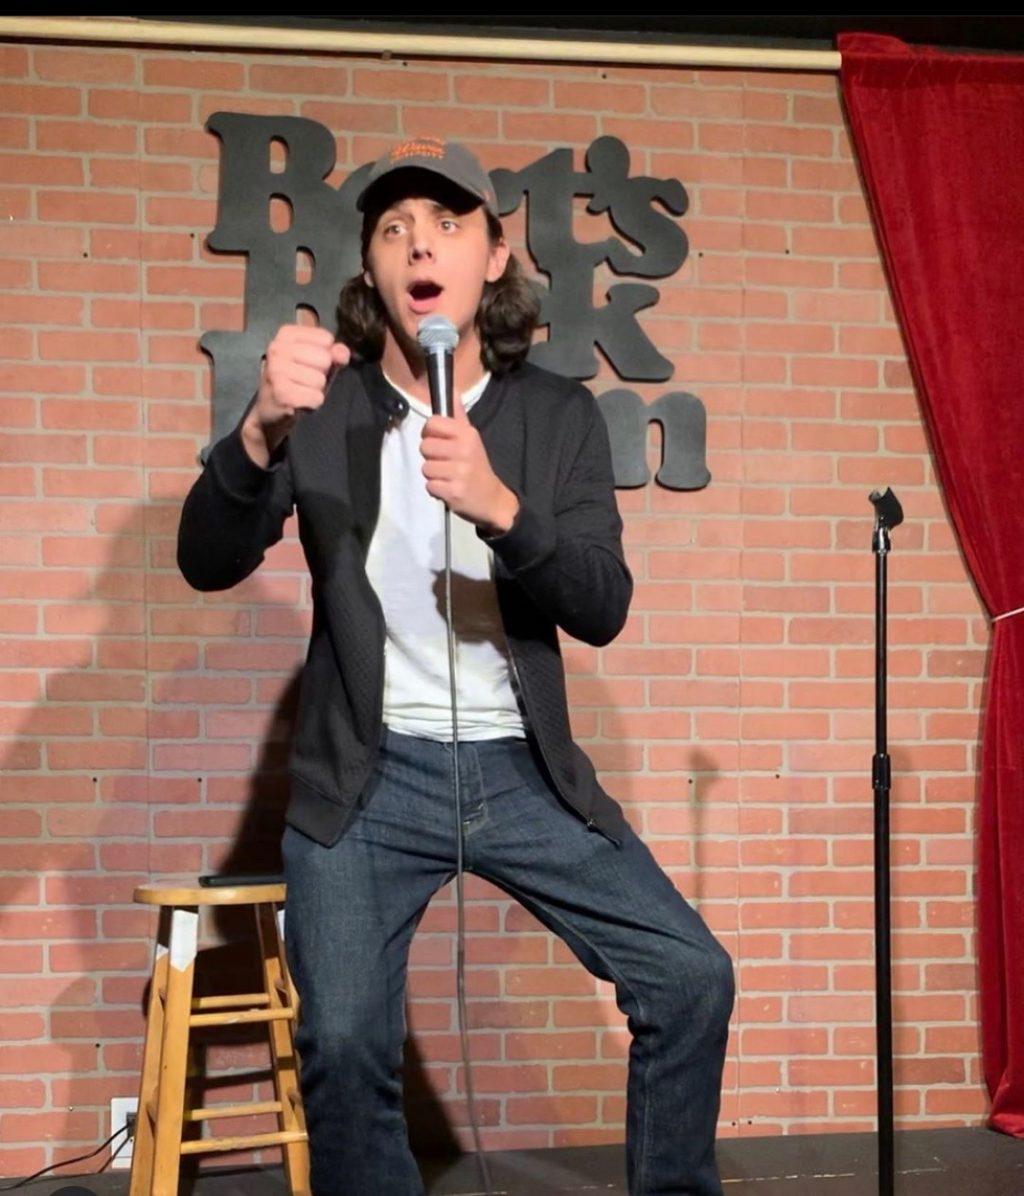 Senior Clayton Mattingly performs stand-up comedy at an open mic night at Bert's Backroom on Melrose Avenue. He has written his own material for his two-year stand-up comedy stint. Photo courtesy of Clayton Mattingly